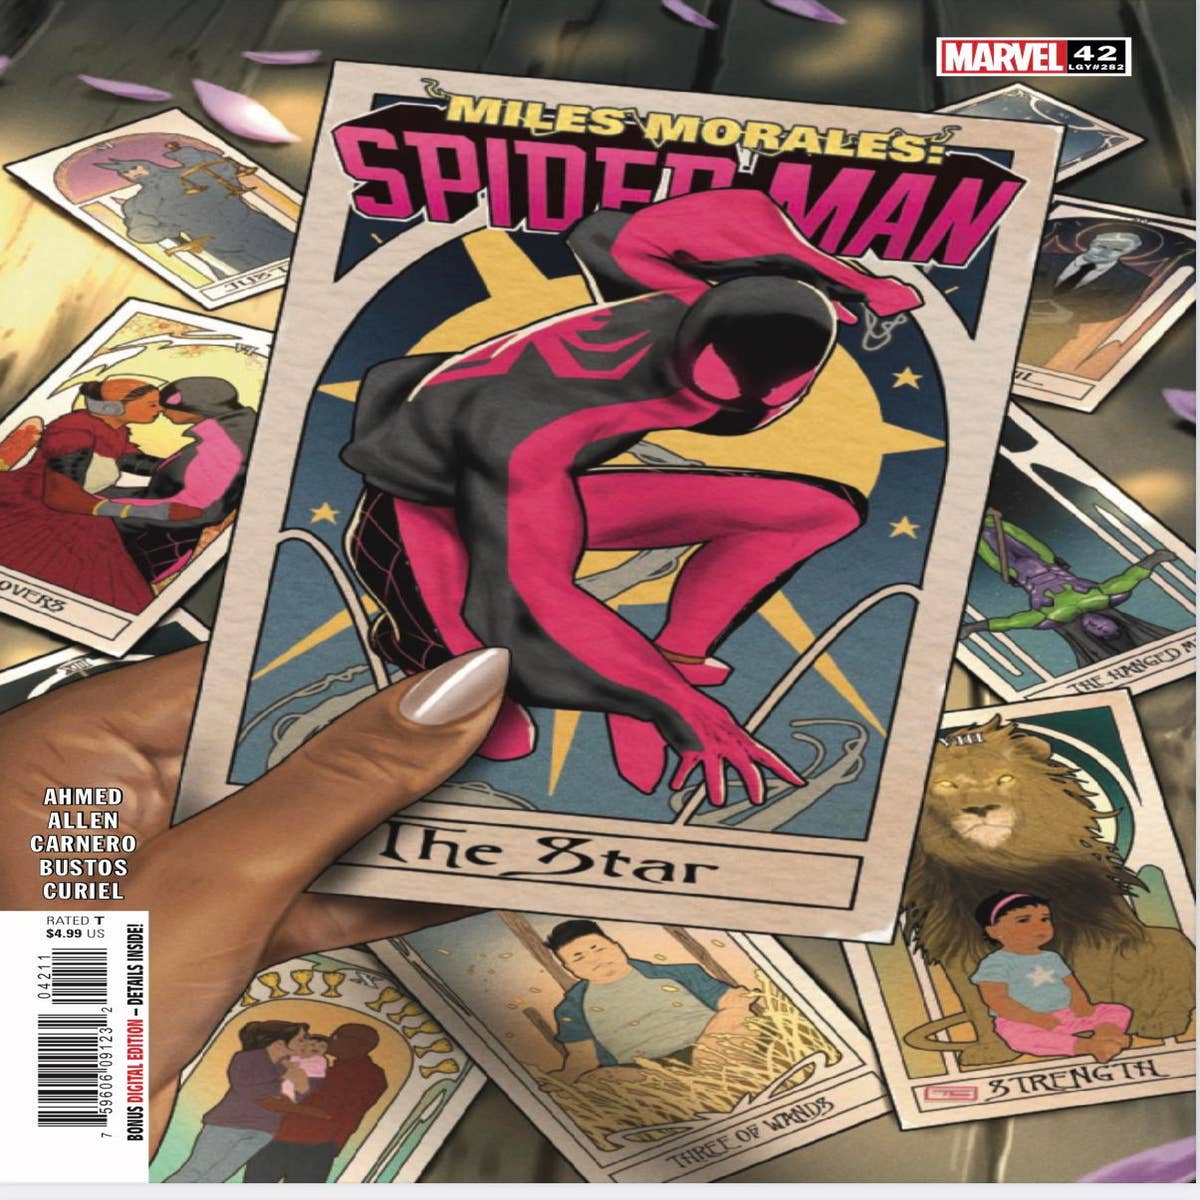 Marvel's Miles Morales: Spider-Man comic finale presents an